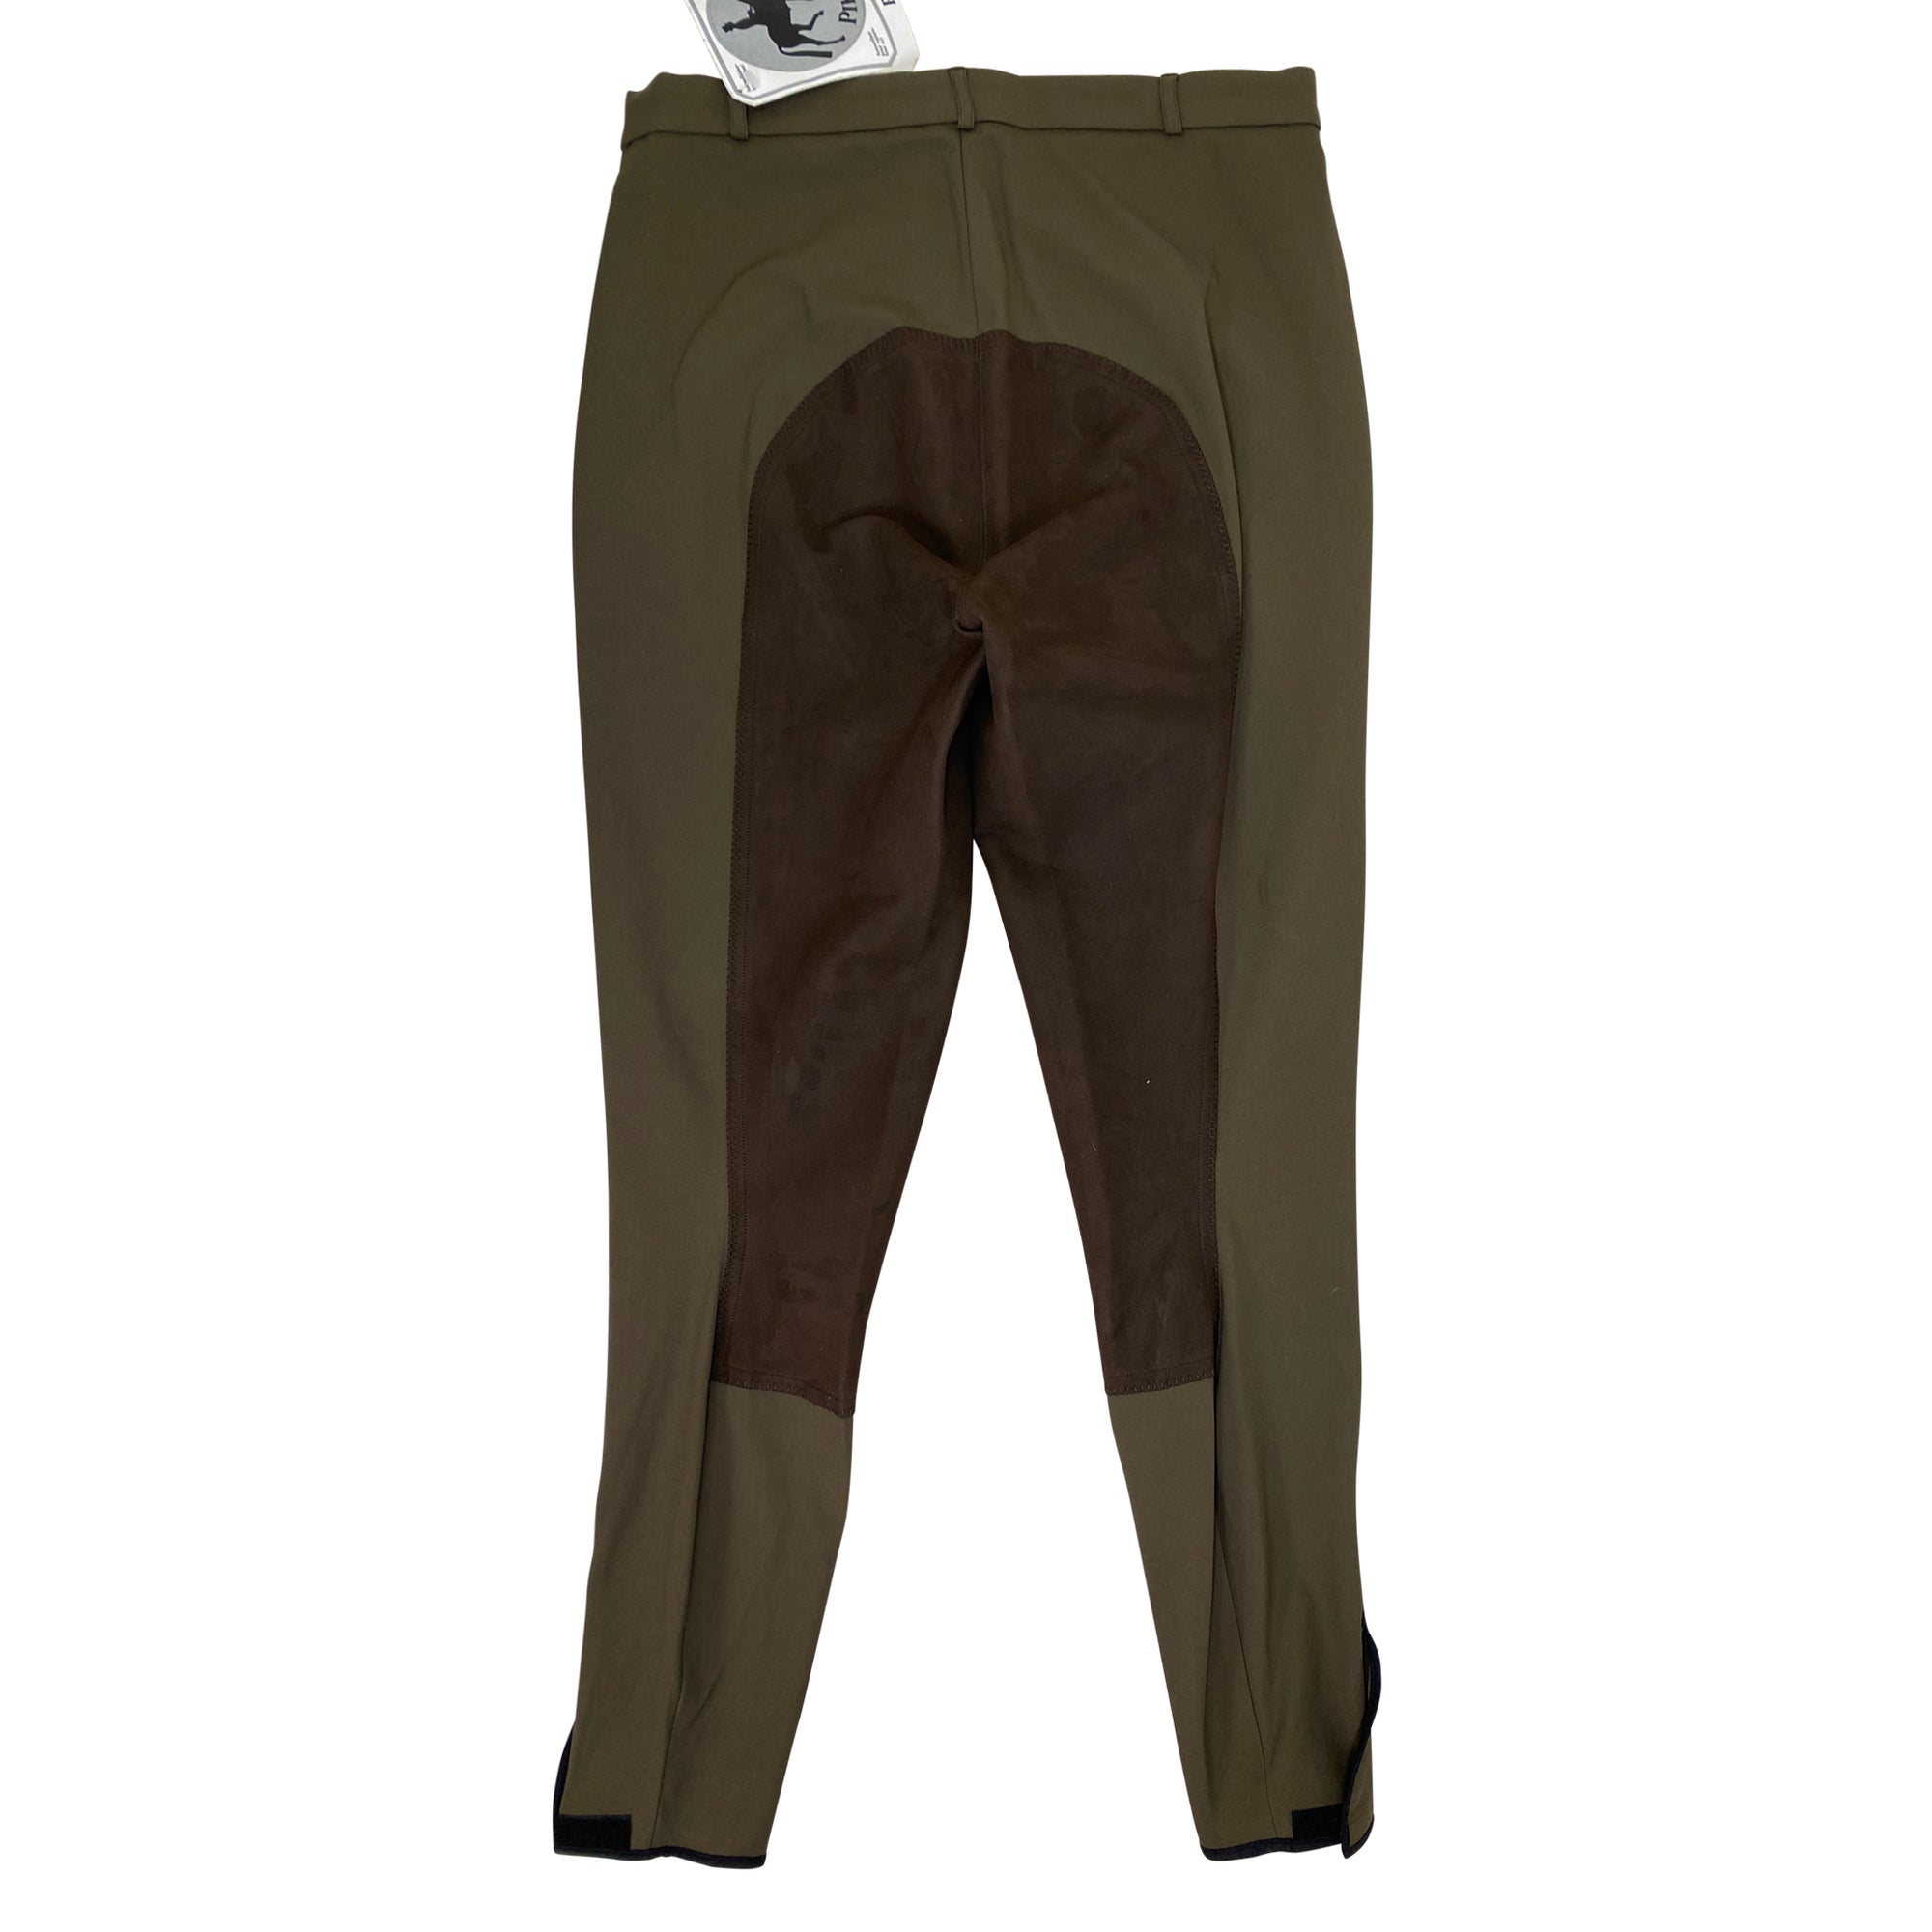 Pikeur 'Liostro' Breeches in Olive